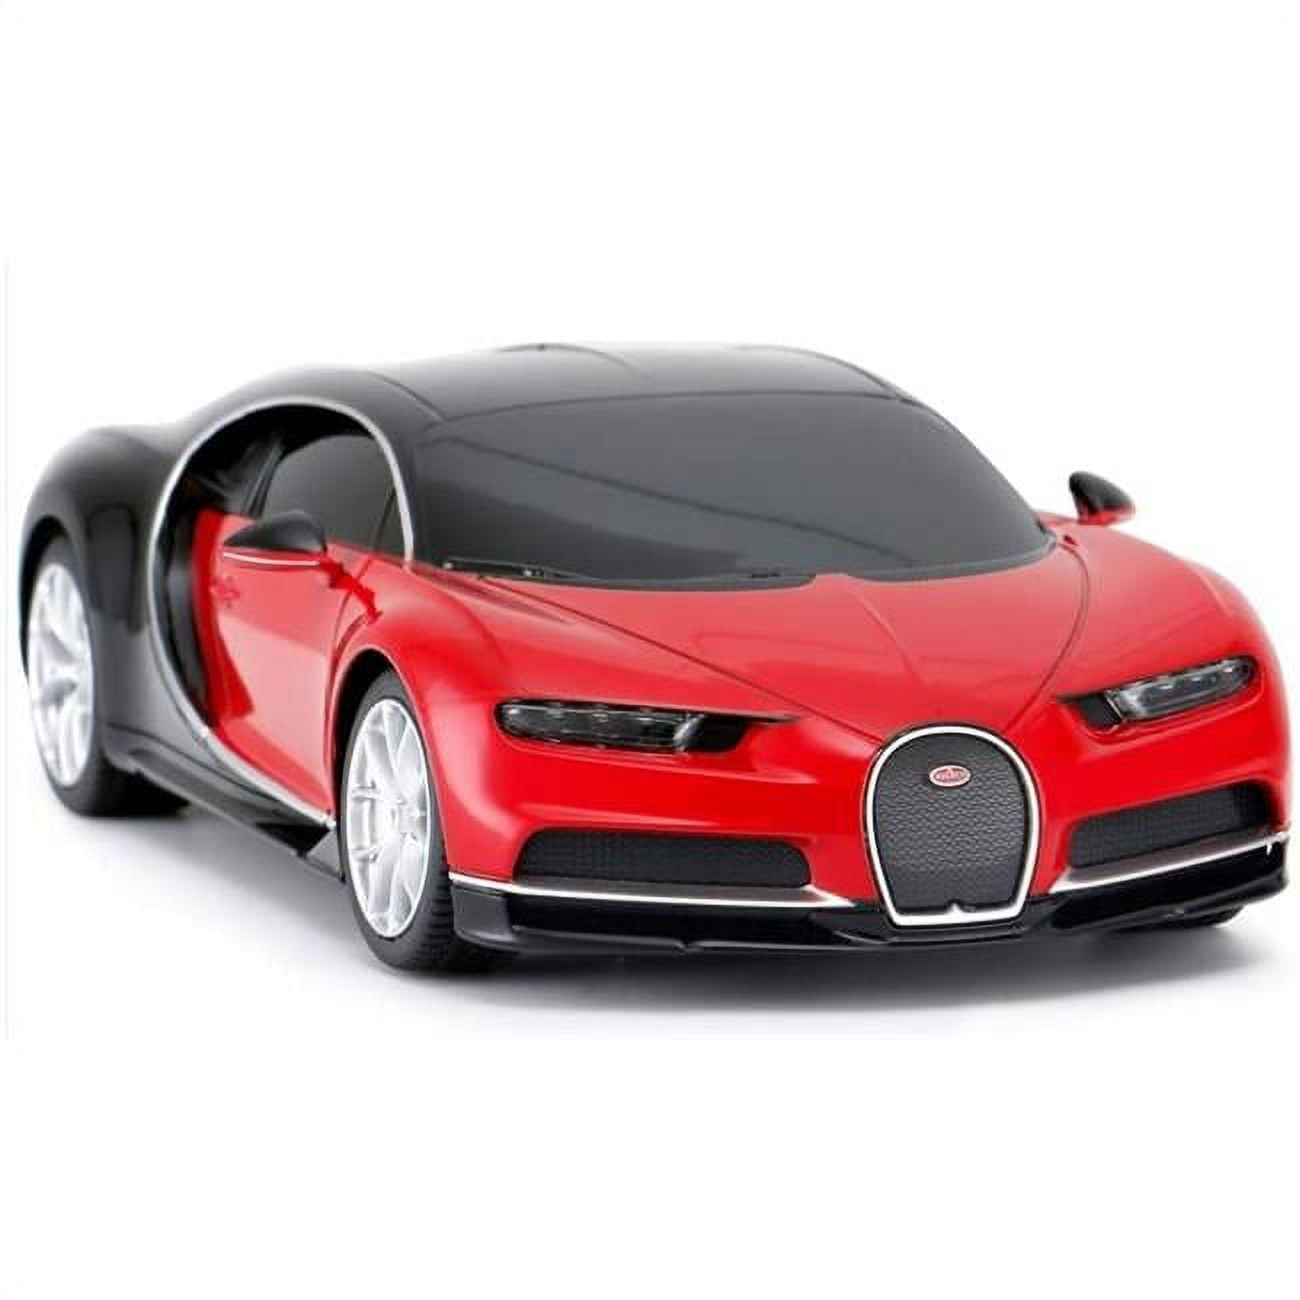 Picture of AZ Trading & Import BVC24R 0.0416 in. Scale Bugatti Chiron RC Model Car - Red